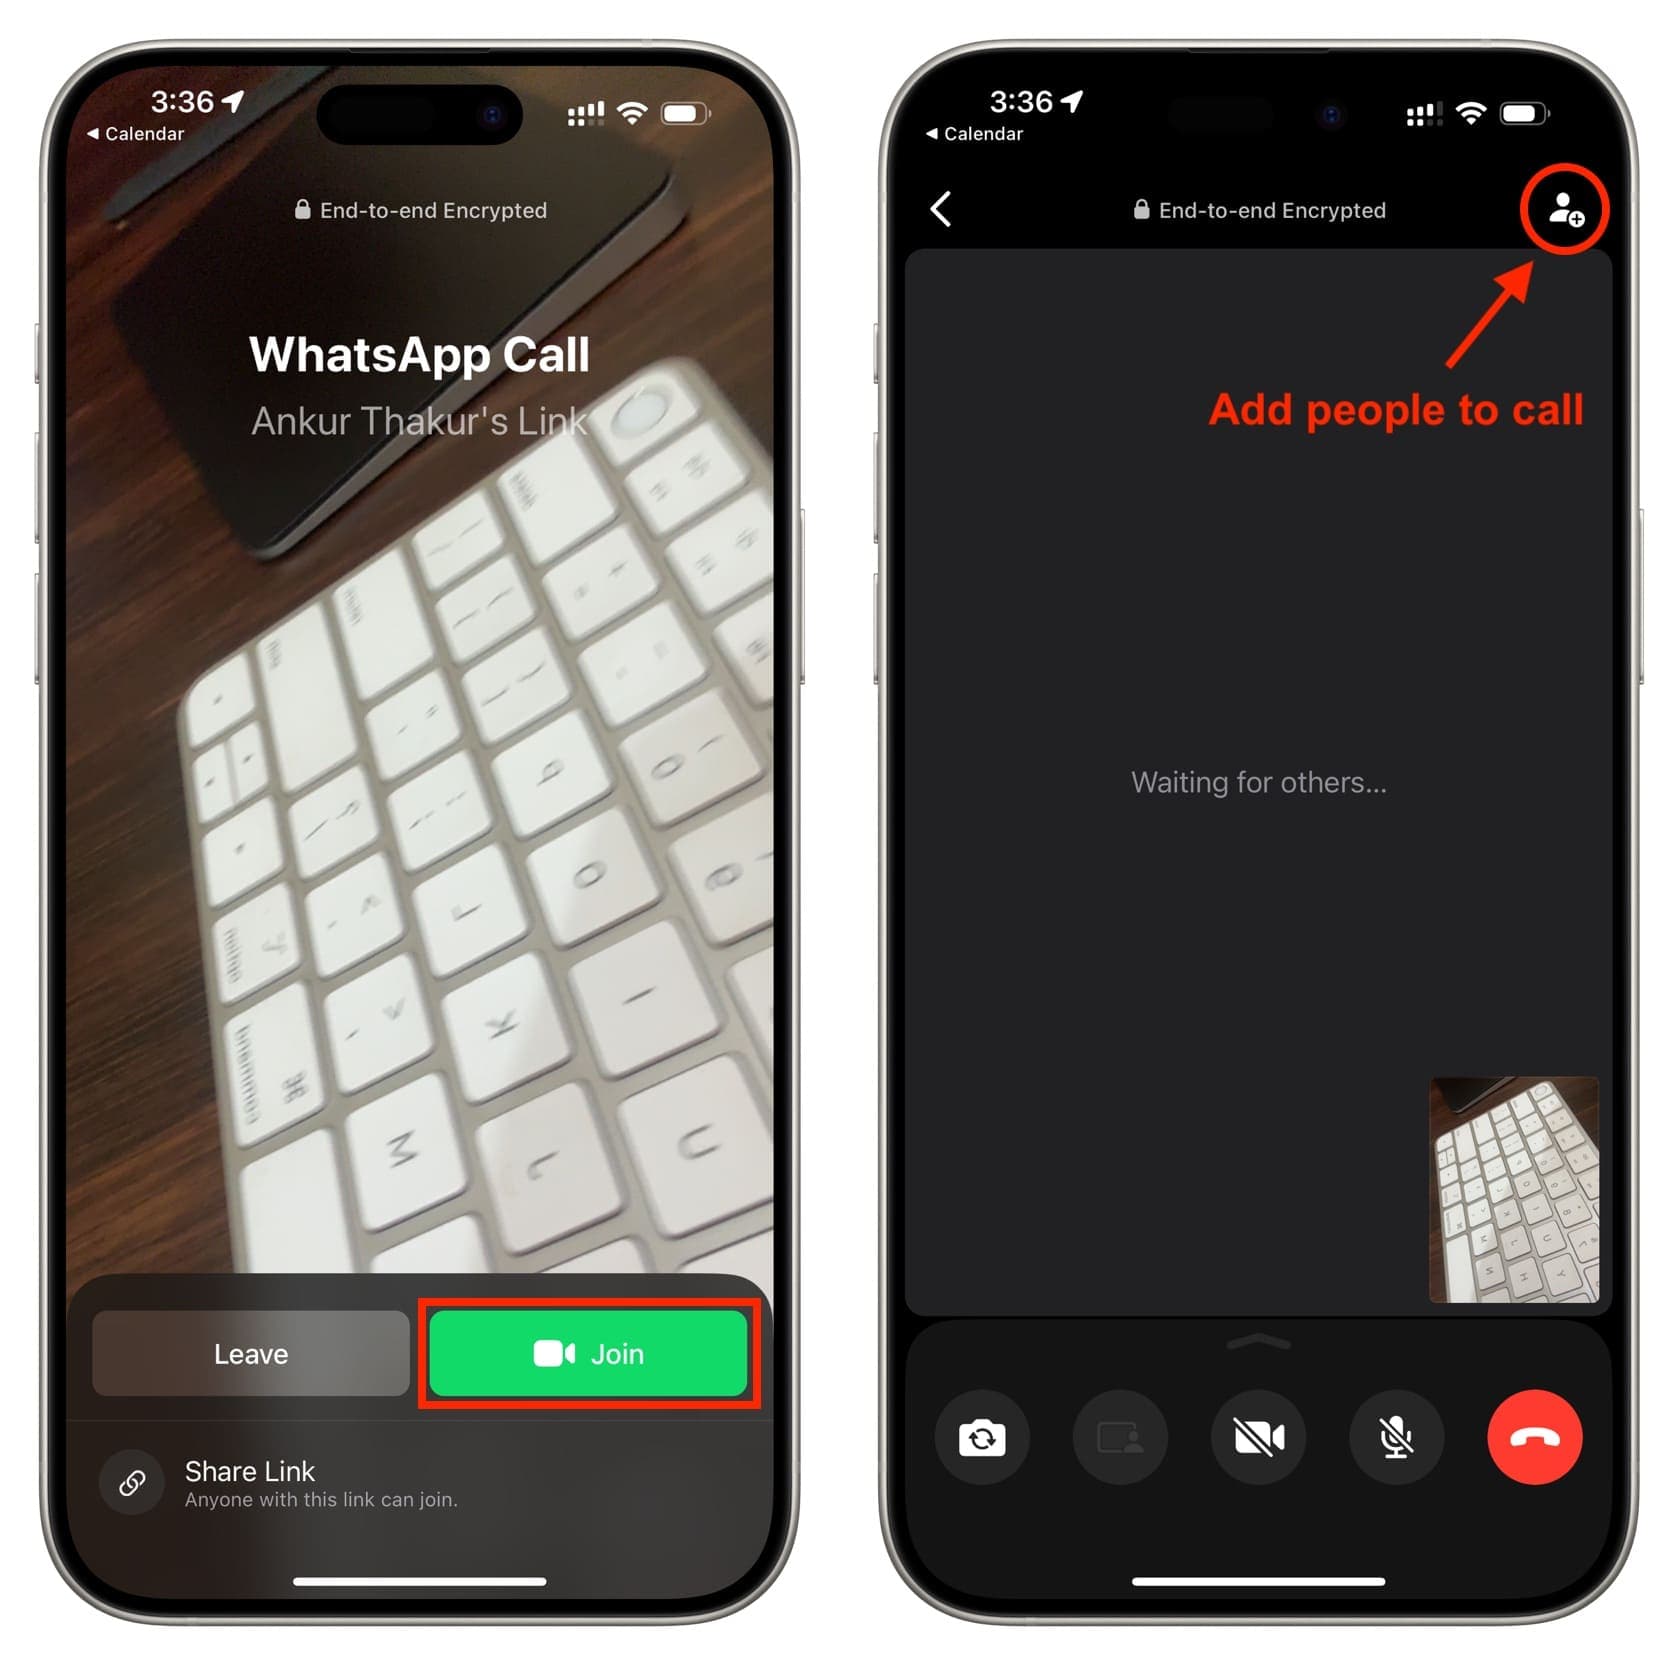 Join WhatsApp call and add people to your call on iPhone